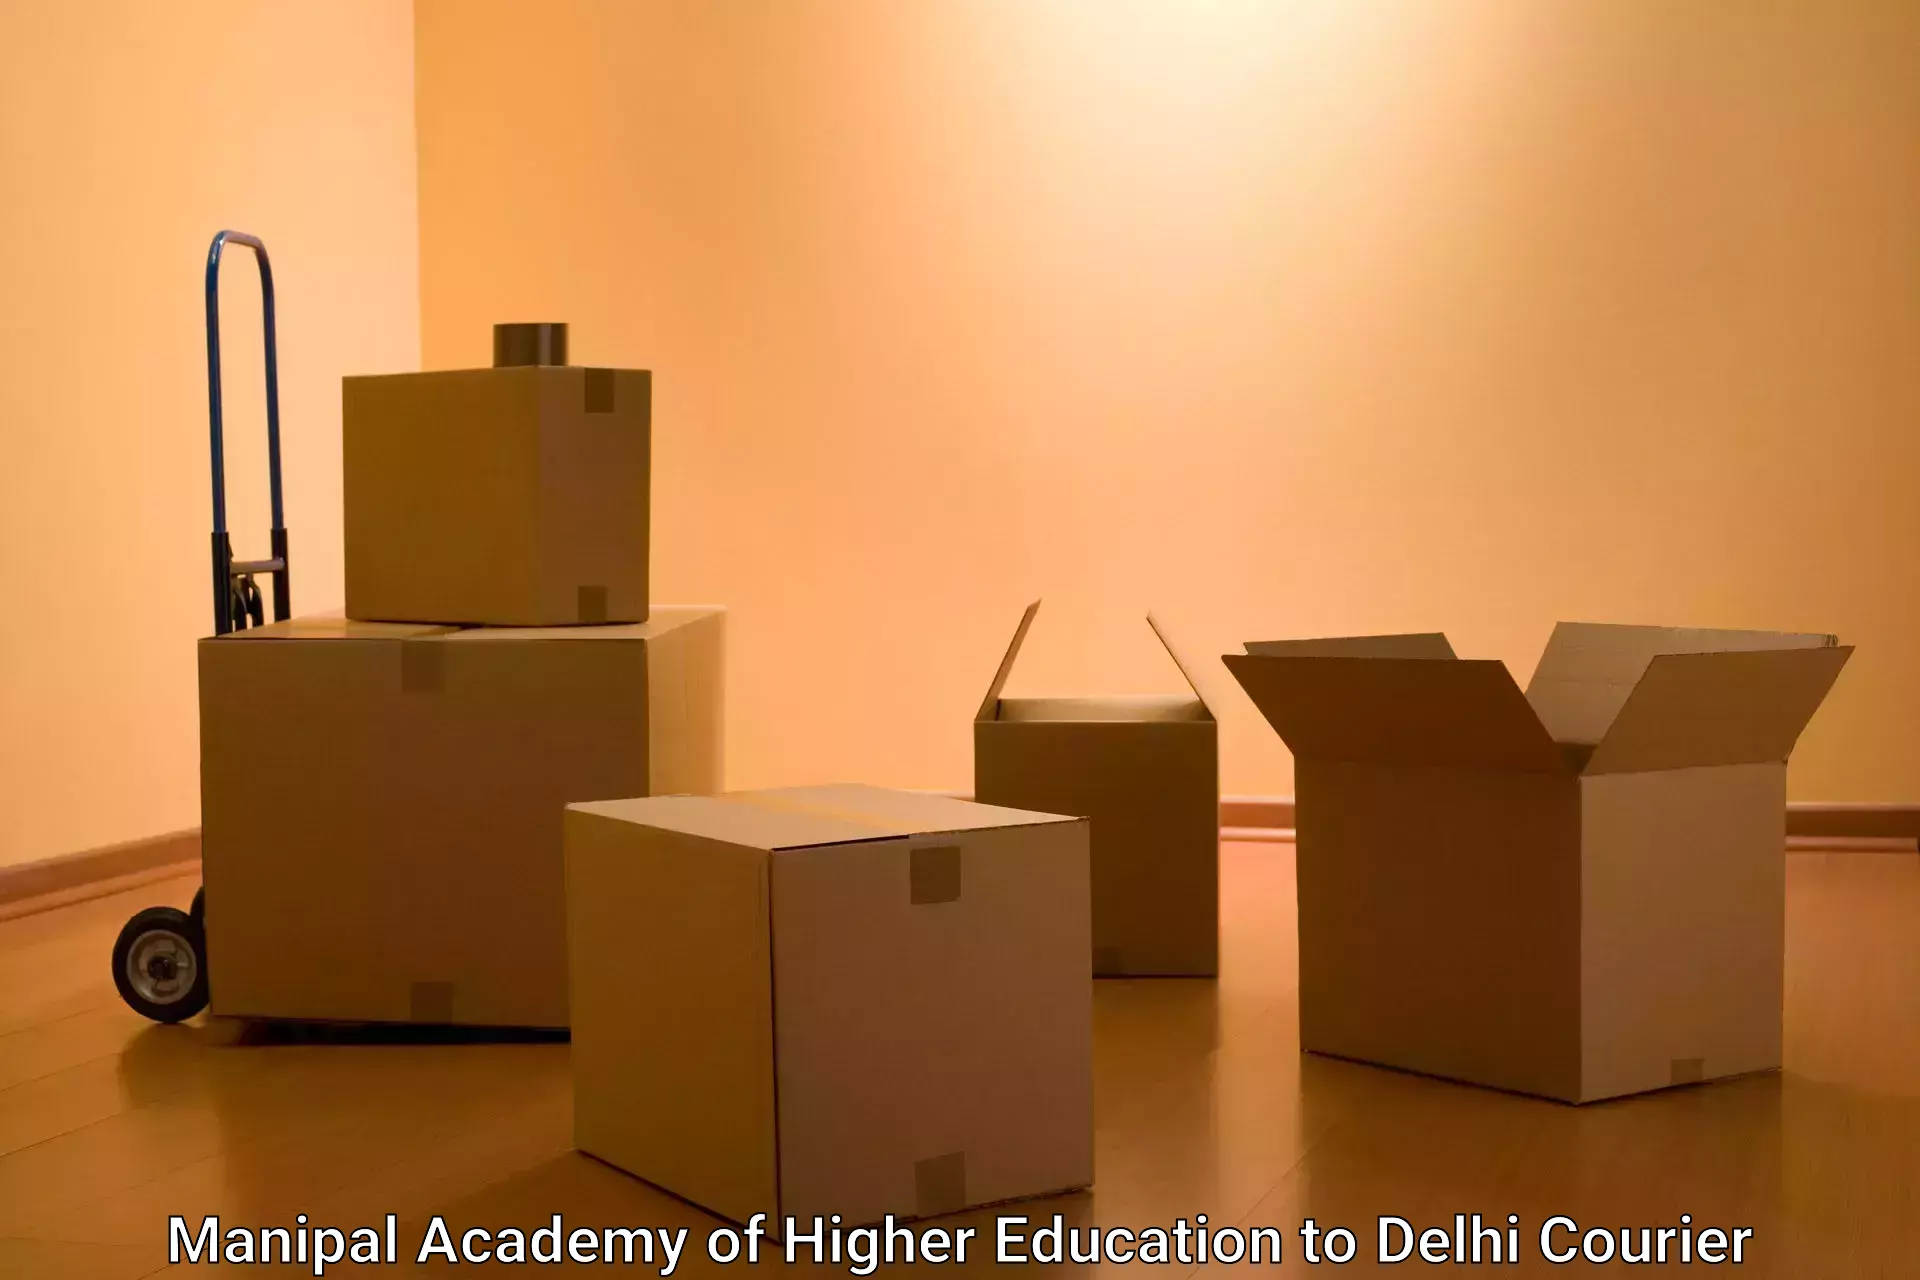 Efficient order fulfillment Manipal Academy of Higher Education to Delhi